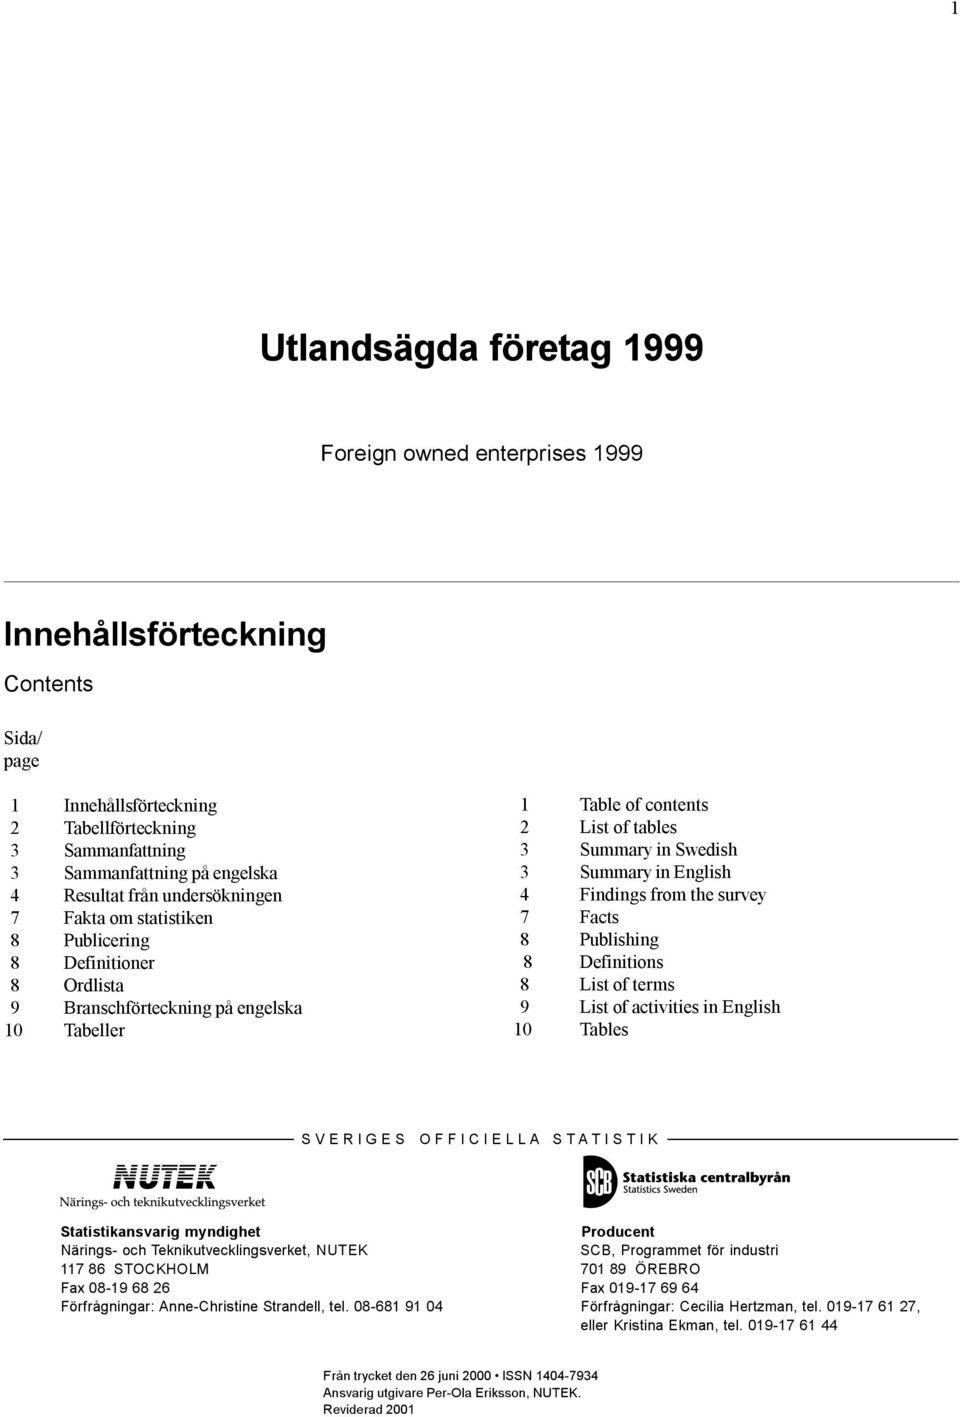 English 4 Findings from the survey 7 Facts 8Publishing 8Definitions 8List of terms 9 List of activities in English 10 Tables SVERIGES OFFICIELLA STATISTIK Statistikansvarig myndighet Producent